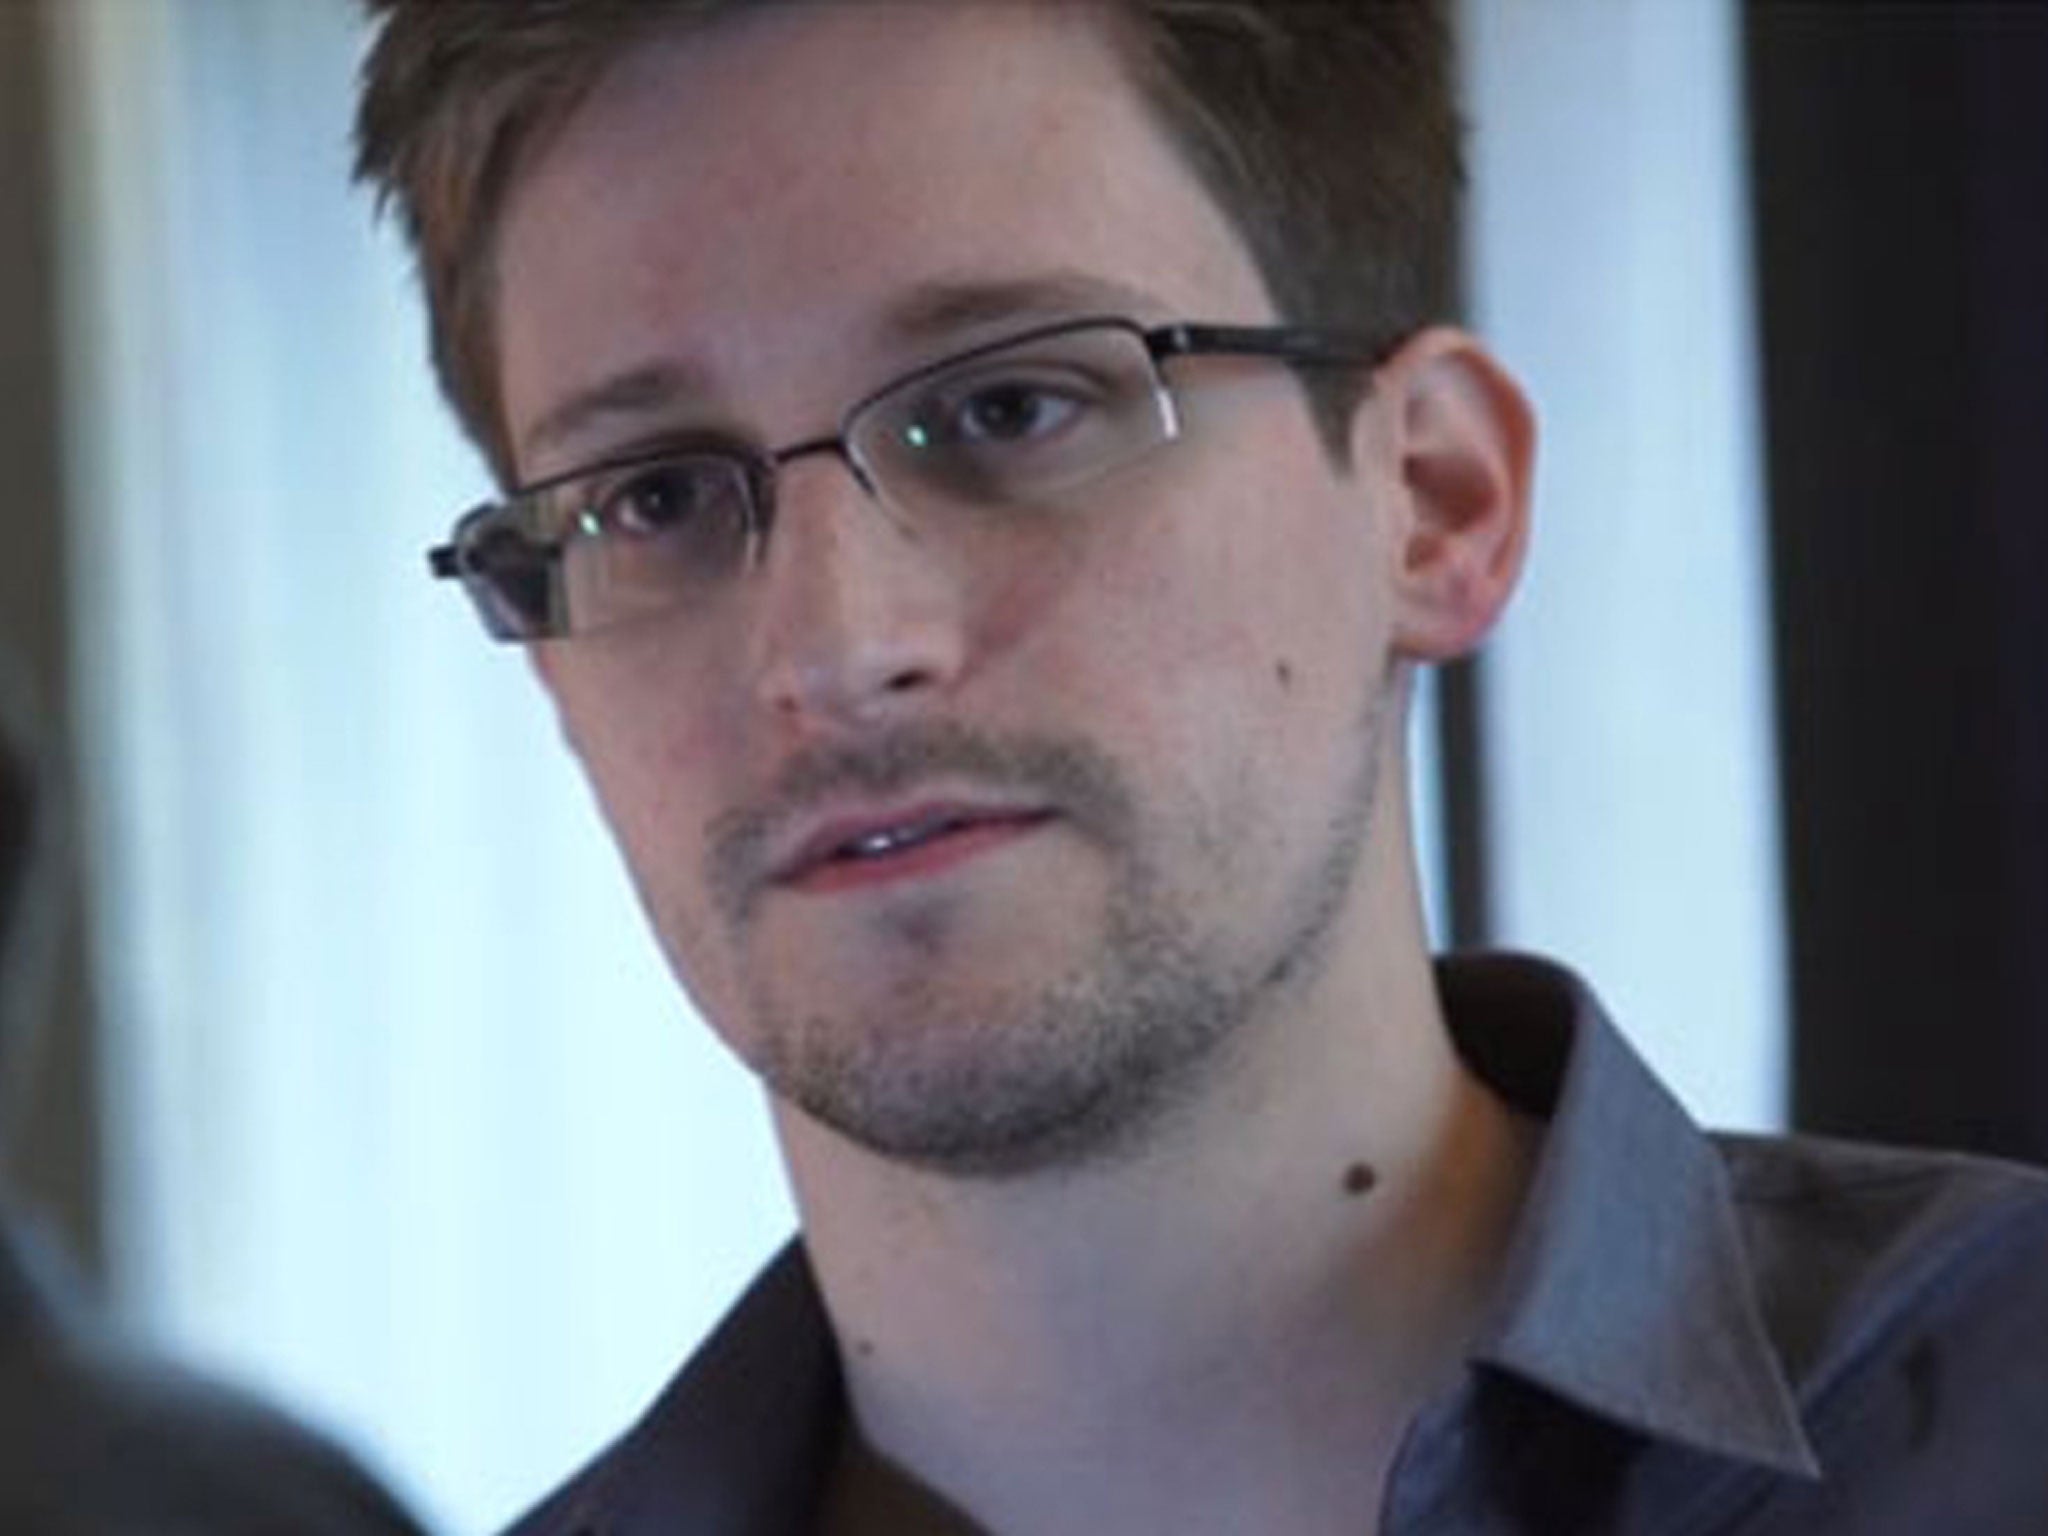 'I am not afraid,’ says high-school dropout Edward Snowden, as he reveals his identity from a Hong Kong hotel room